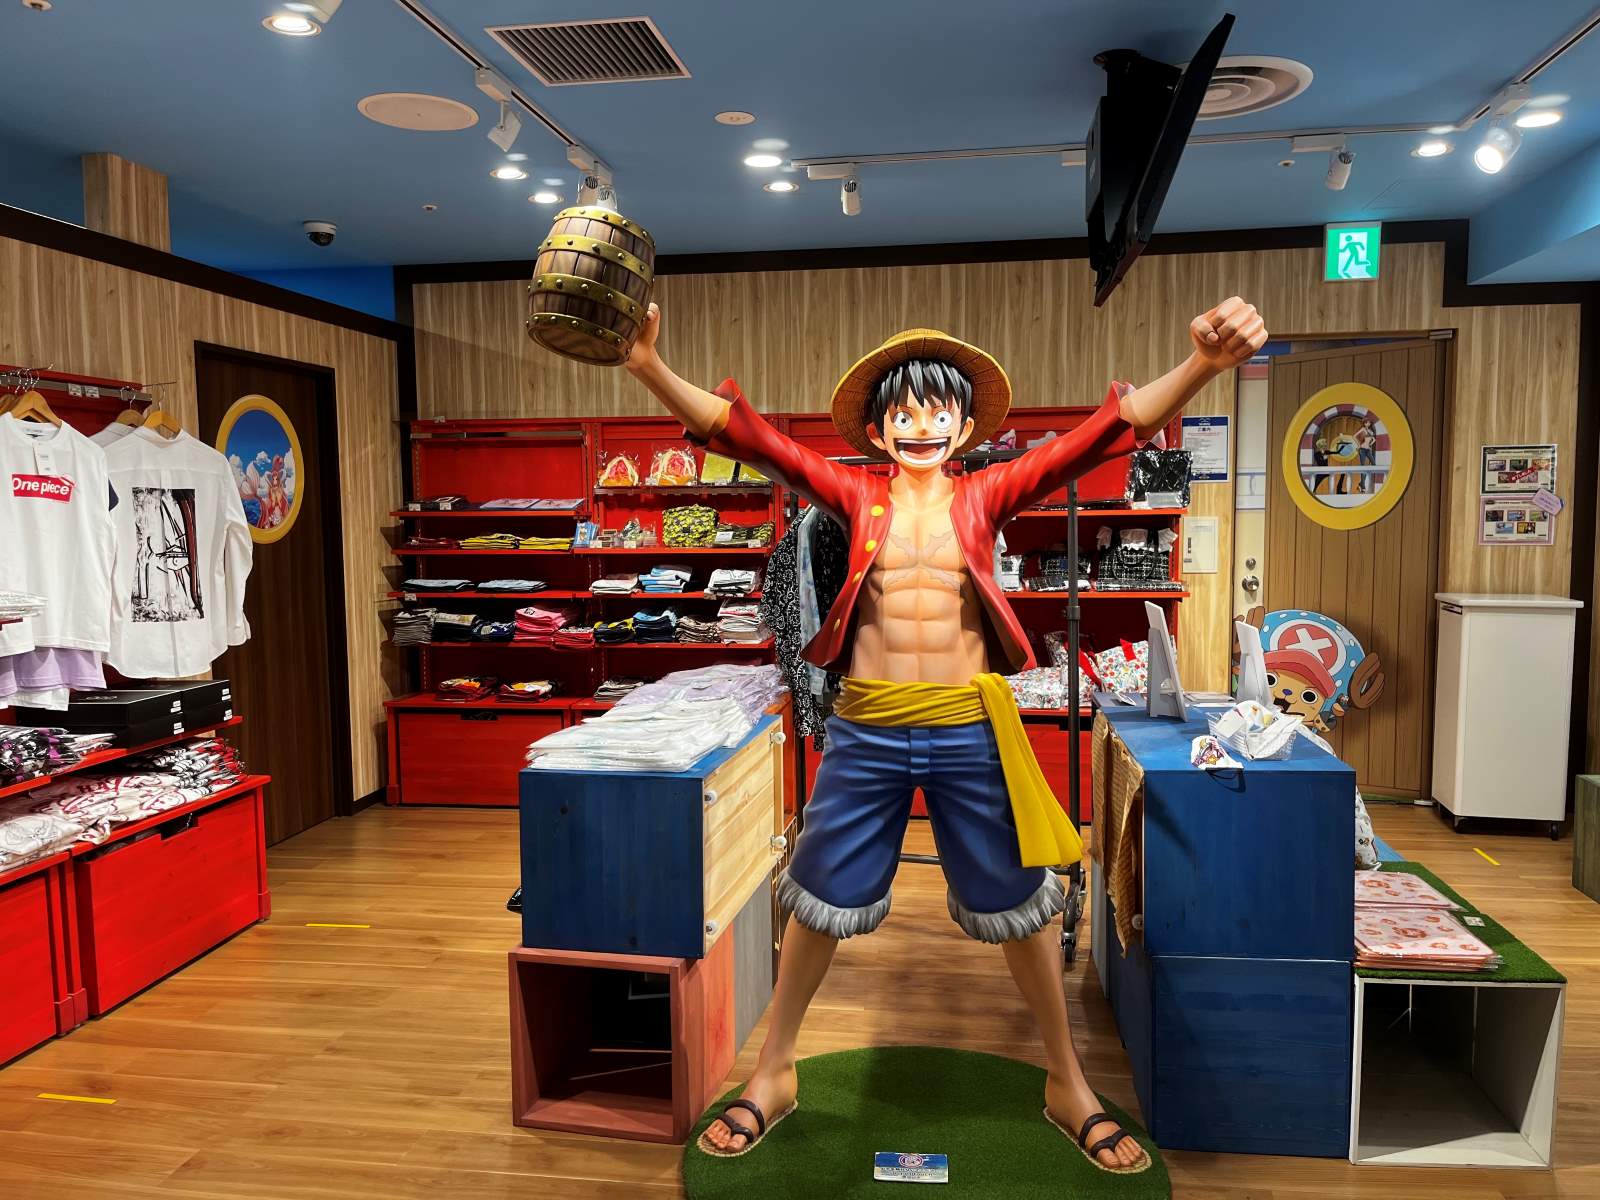 The Ultimate One Piece Merchandise Destination Revealed!